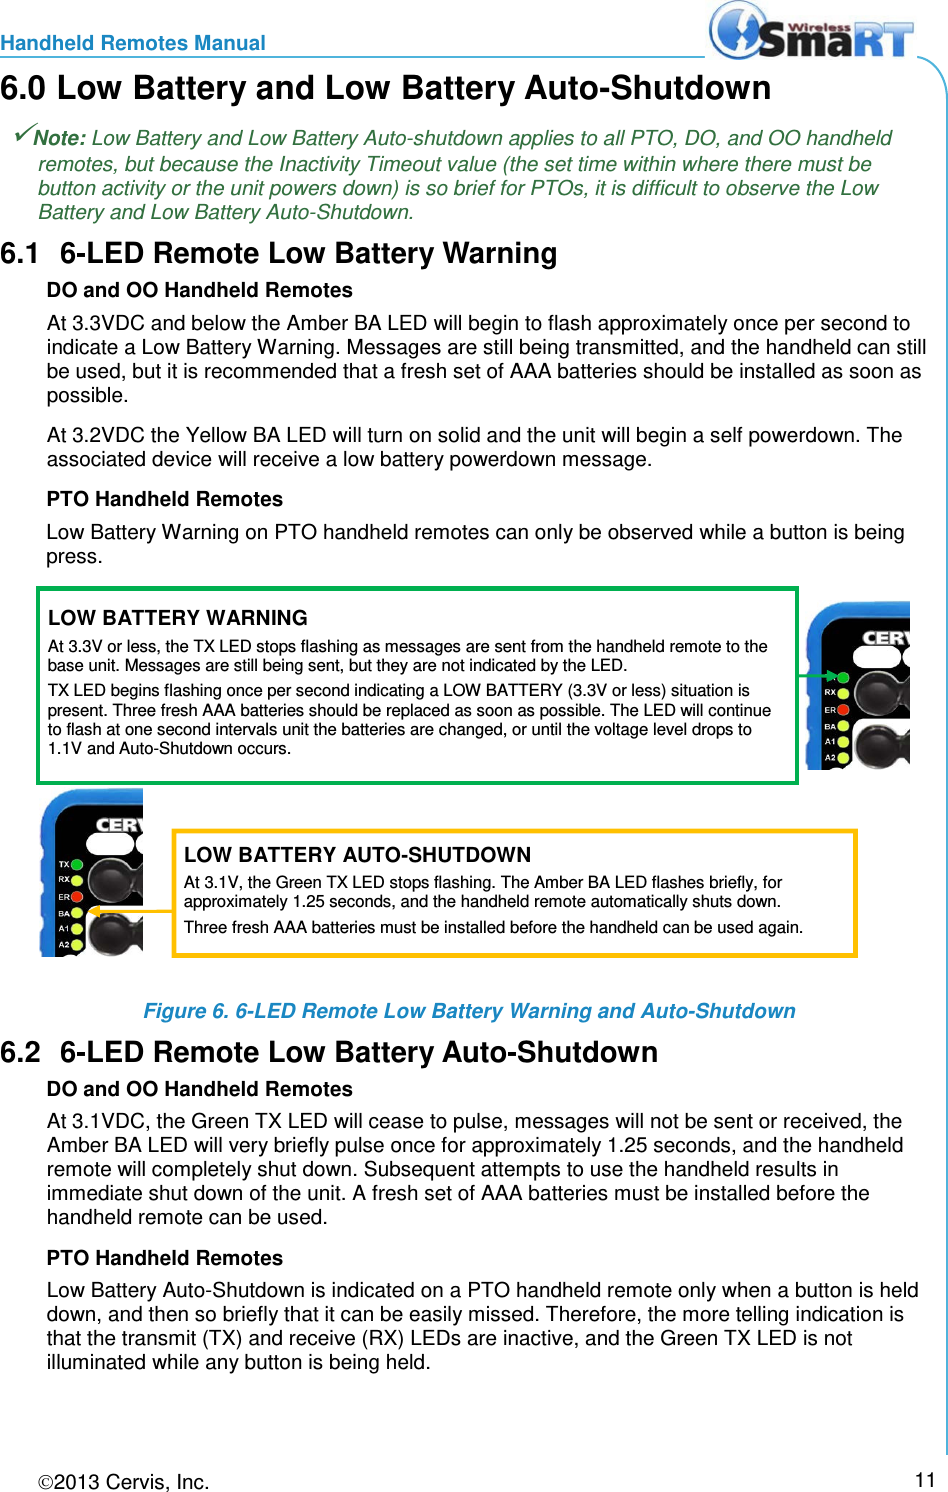 Handheld Remotes Manual 2013 Cervis, Inc.     11 6.0 Low Battery and Low Battery Auto-Shutdown Note: Low Battery and Low Battery Auto-shutdown applies to all PTO, DO, and OO handheld remotes, but because the Inactivity Timeout value (the set time within where there must be button activity or the unit powers down) is so brief for PTOs, it is difficult to observe the Low Battery and Low Battery Auto-Shutdown. 6.1  6-LED Remote Low Battery Warning DO and OO Handheld Remotes At 3.3VDC and below the Amber BA LED will begin to flash approximately once per second to indicate a Low Battery Warning. Messages are still being transmitted, and the handheld can still be used, but it is recommended that a fresh set of AAA batteries should be installed as soon as possible. At 3.2VDC the Yellow BA LED will turn on solid and the unit will begin a self powerdown. The associated device will receive a low battery powerdown message. PTO Handheld Remotes Low Battery Warning on PTO handheld remotes can only be observed while a button is being press.   Figure 6. 6-LED Remote Low Battery Warning and Auto-Shutdown 6.2  6-LED Remote Low Battery Auto-Shutdown DO and OO Handheld Remotes At 3.1VDC, the Green TX LED will cease to pulse, messages will not be sent or received, the Amber BA LED will very briefly pulse once for approximately 1.25 seconds, and the handheld remote will completely shut down. Subsequent attempts to use the handheld results in immediate shut down of the unit. A fresh set of AAA batteries must be installed before the handheld remote can be used. PTO Handheld Remotes Low Battery Auto-Shutdown is indicated on a PTO handheld remote only when a button is held down, and then so briefly that it can be easily missed. Therefore, the more telling indication is that the transmit (TX) and receive (RX) LEDs are inactive, and the Green TX LED is not illuminated while any button is being held.  LOW BATTERY WARNING At 3.3V or less, the TX LED stops flashing as messages are sent from the handheld remote to the base unit. Messages are still being sent, but they are not indicated by the LED. TX LED begins flashing once per second indicating a LOW BATTERY (3.3V or less) situation is present. Three fresh AAA batteries should be replaced as soon as possible. The LED will continue to flash at one second intervals unit the batteries are changed, or until the voltage level drops to 1.1V and Auto-Shutdown occurs. LOW BATTERY AUTO-SHUTDOWN At 3.1V, the Green TX LED stops flashing. The Amber BA LED flashes briefly, for approximately 1.25 seconds, and the handheld remote automatically shuts down.  Three fresh AAA batteries must be installed before the handheld can be used again. 